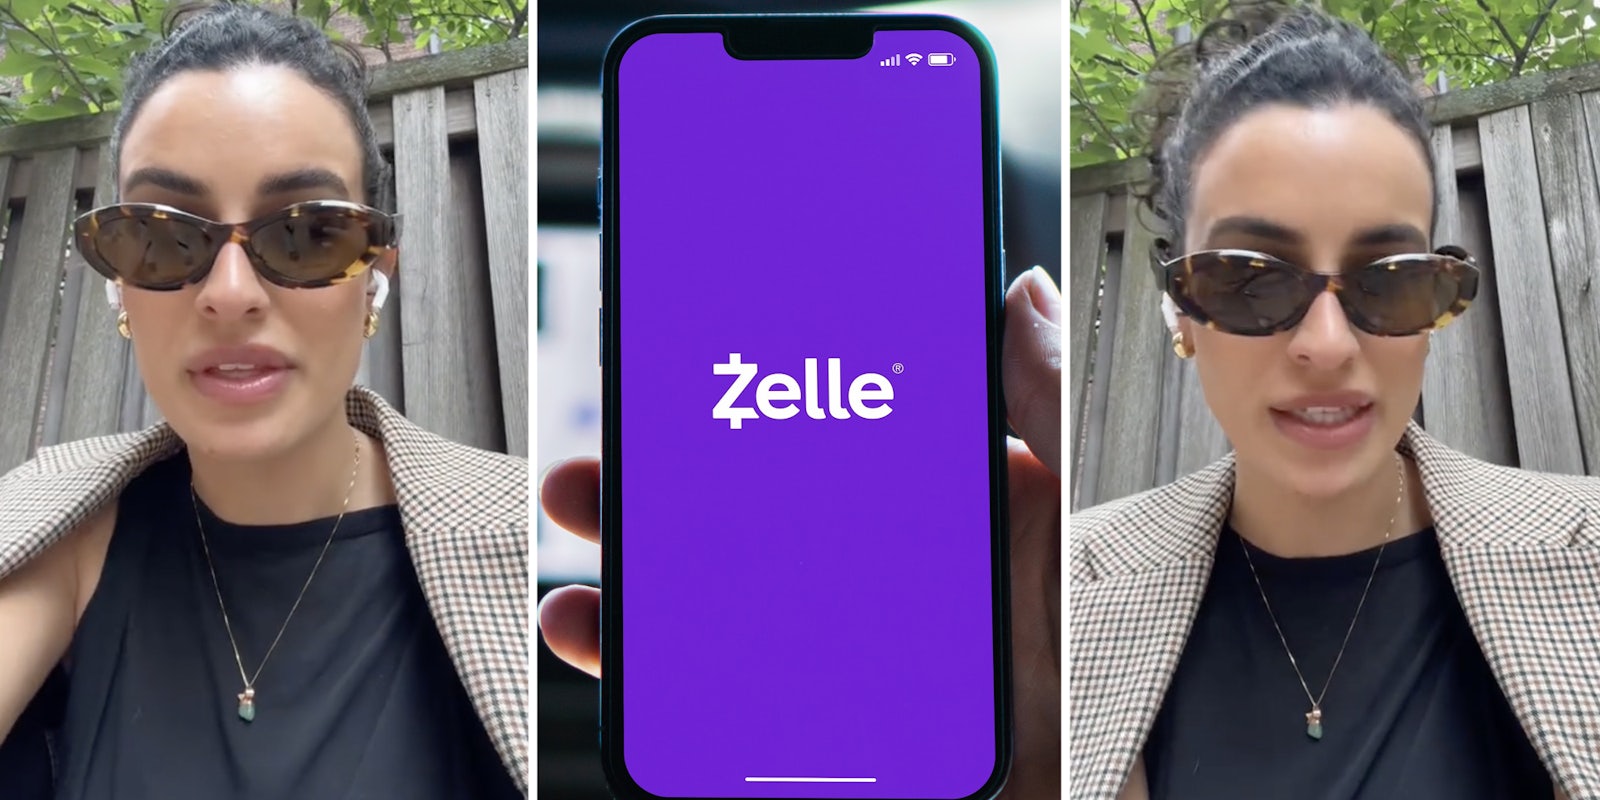 Woman talking(l+r), Hand holding phone with zelle app(c)